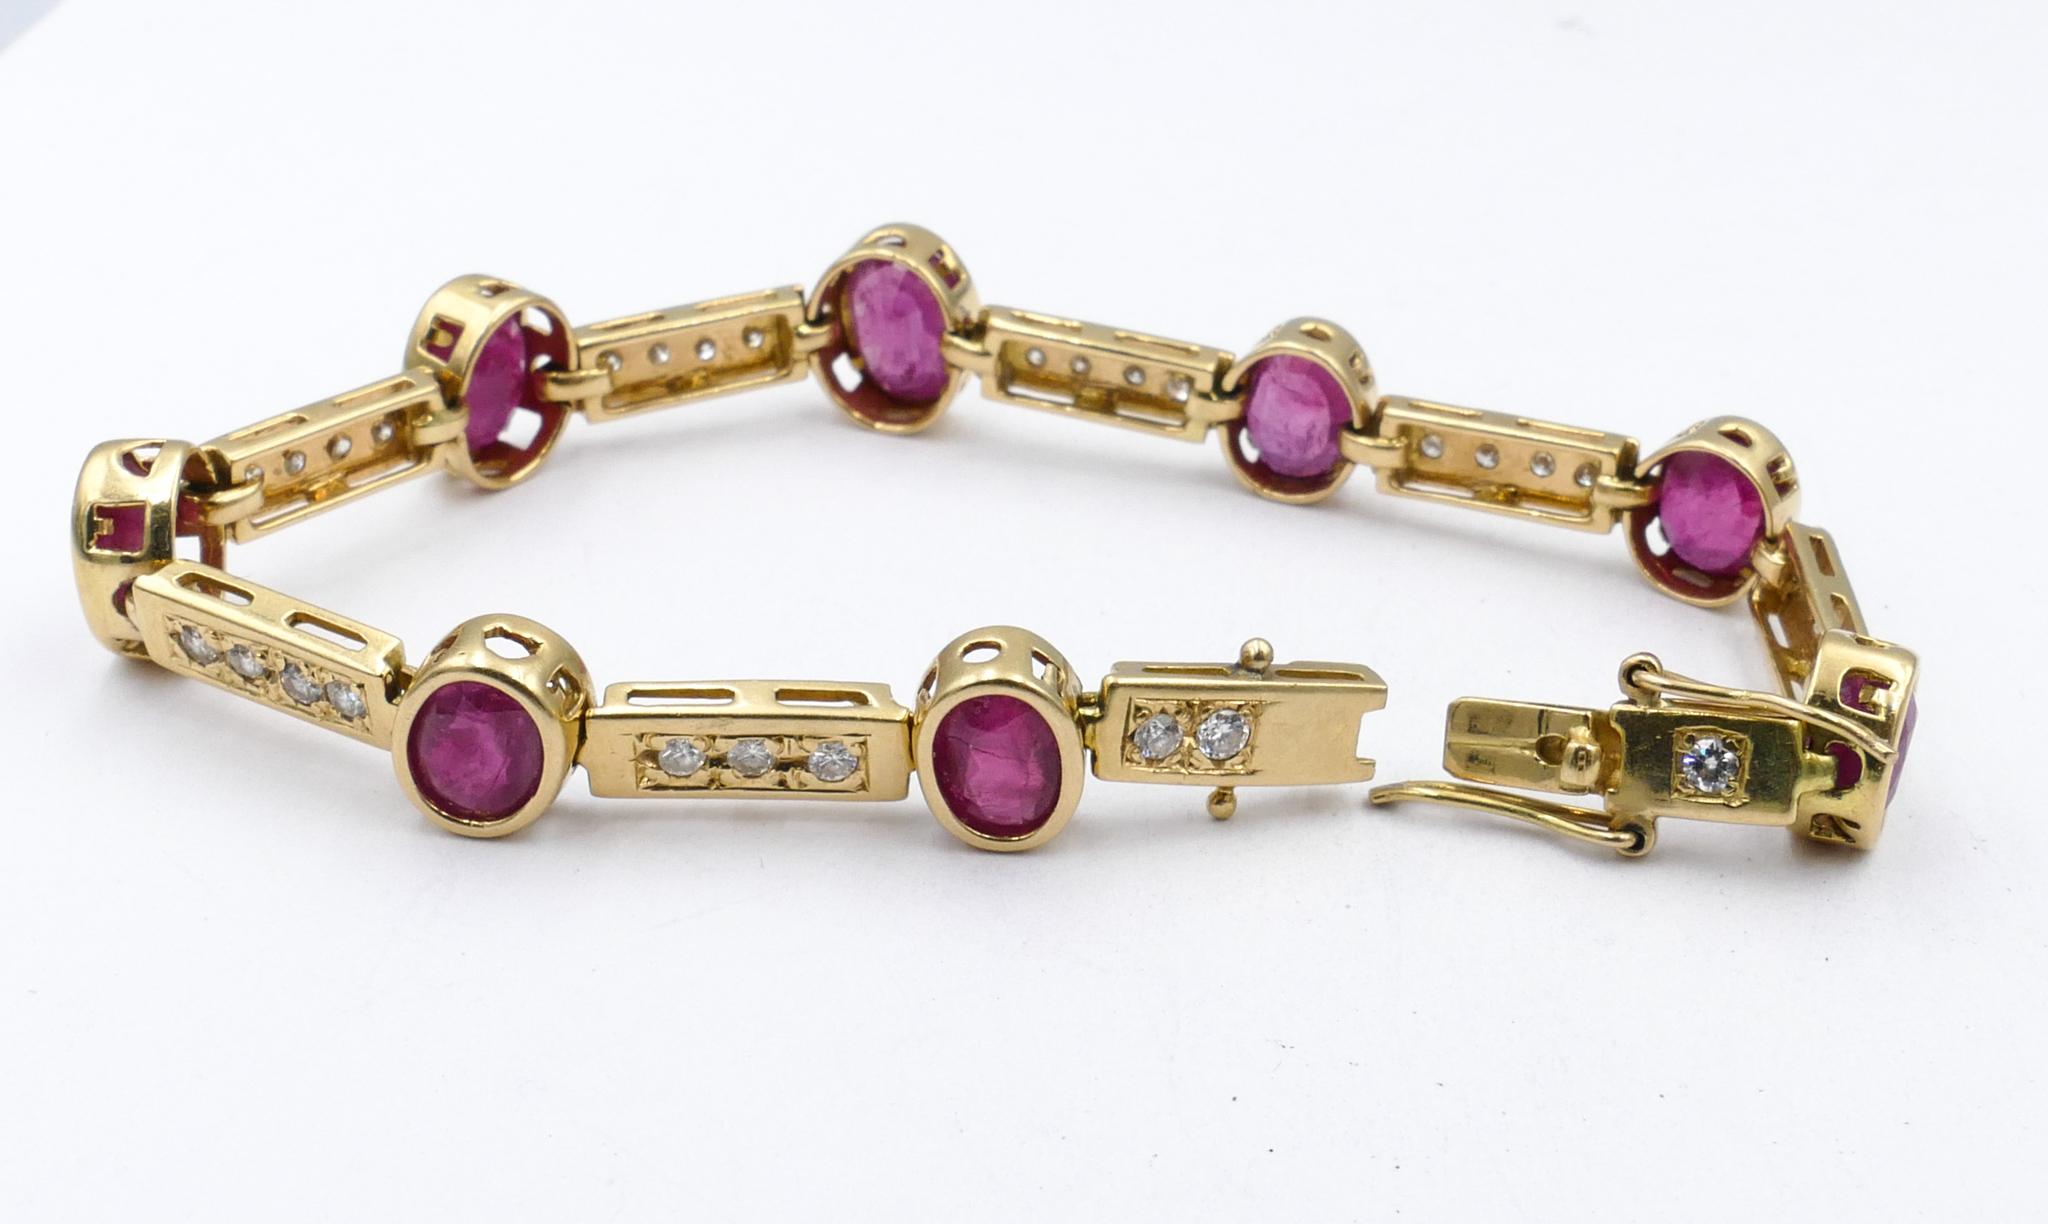 8 Good Rubies are the Centrepiece of this very wearable 'goes with everything' Bracelet. 
The Rubies are Oval Cut, purplish-red in colour, individually bezel set along with 29 round brilliant cut Diamonds, colour G/H, clarity SI1-SI2, & 0.87 Carats.